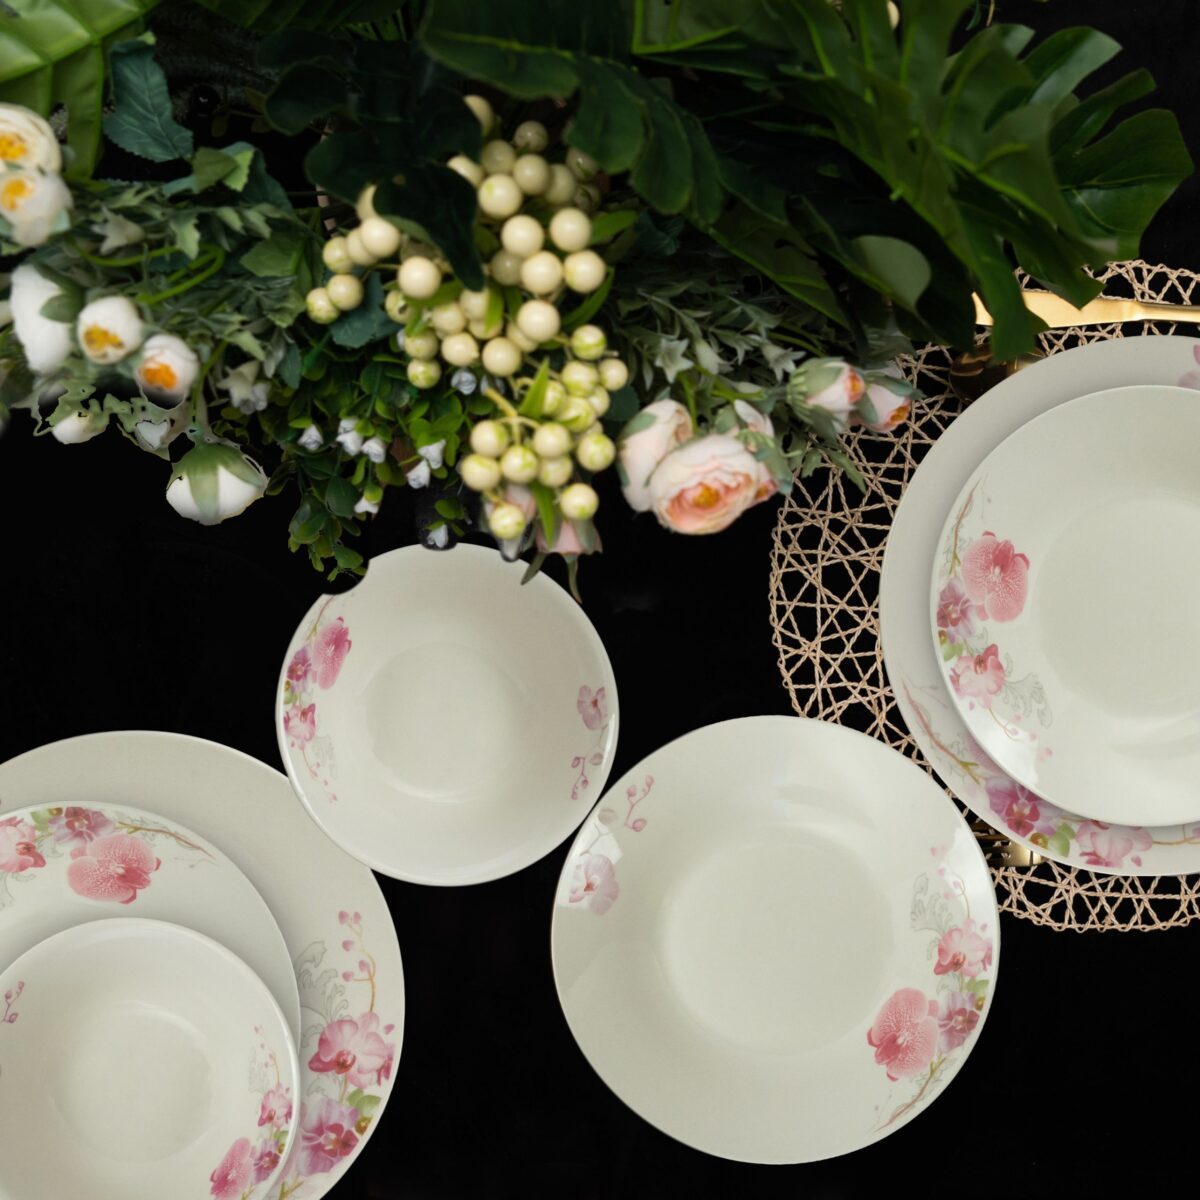 Dinnerware Set, 24 pieces, for 8 people, Cesiro, Ivory with orchid